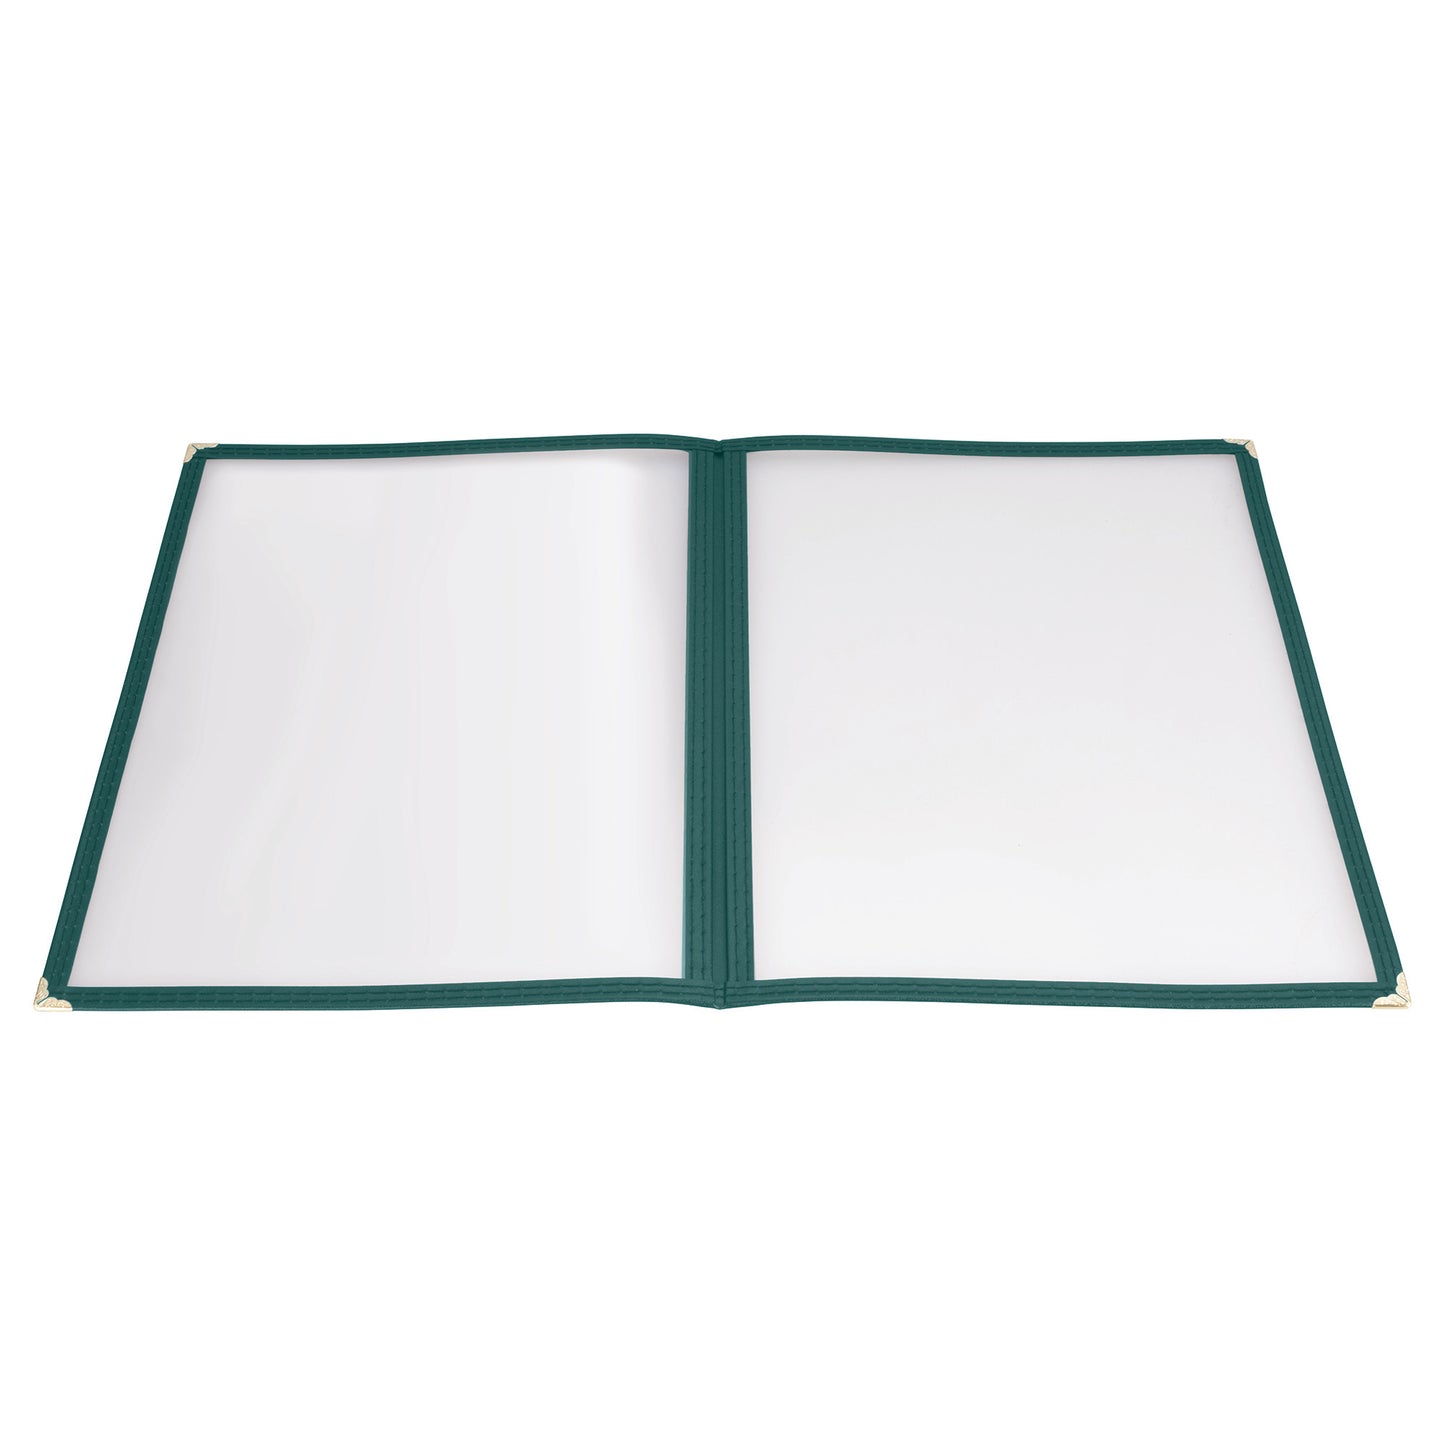 PMCD-9G - Book-Fold Double Panel Menu Cover - Green, 9-3/8 x 12-1/8